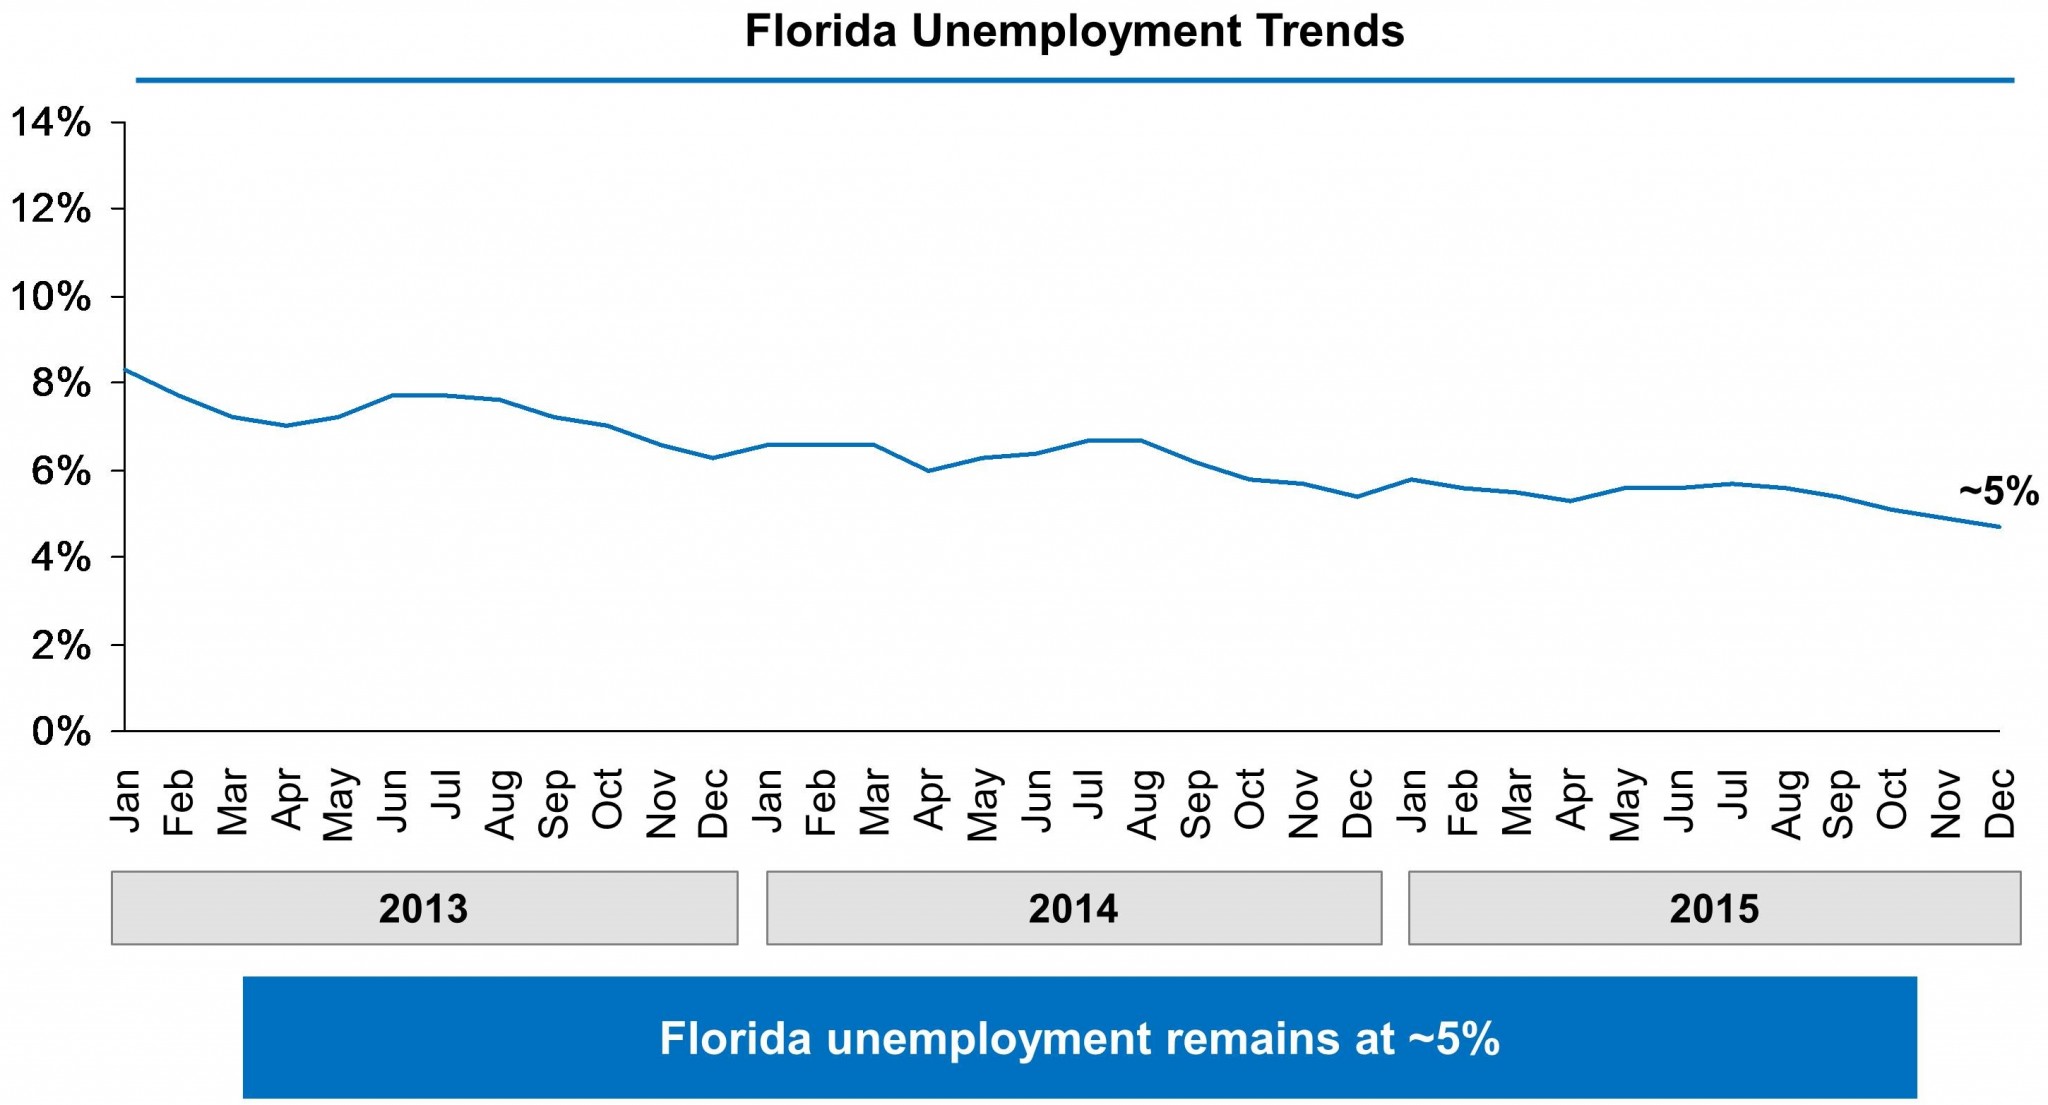 Chart showing Florida’s unemployment rate falling from just above 8% in January 2013 to approximately 5% in December 2015.